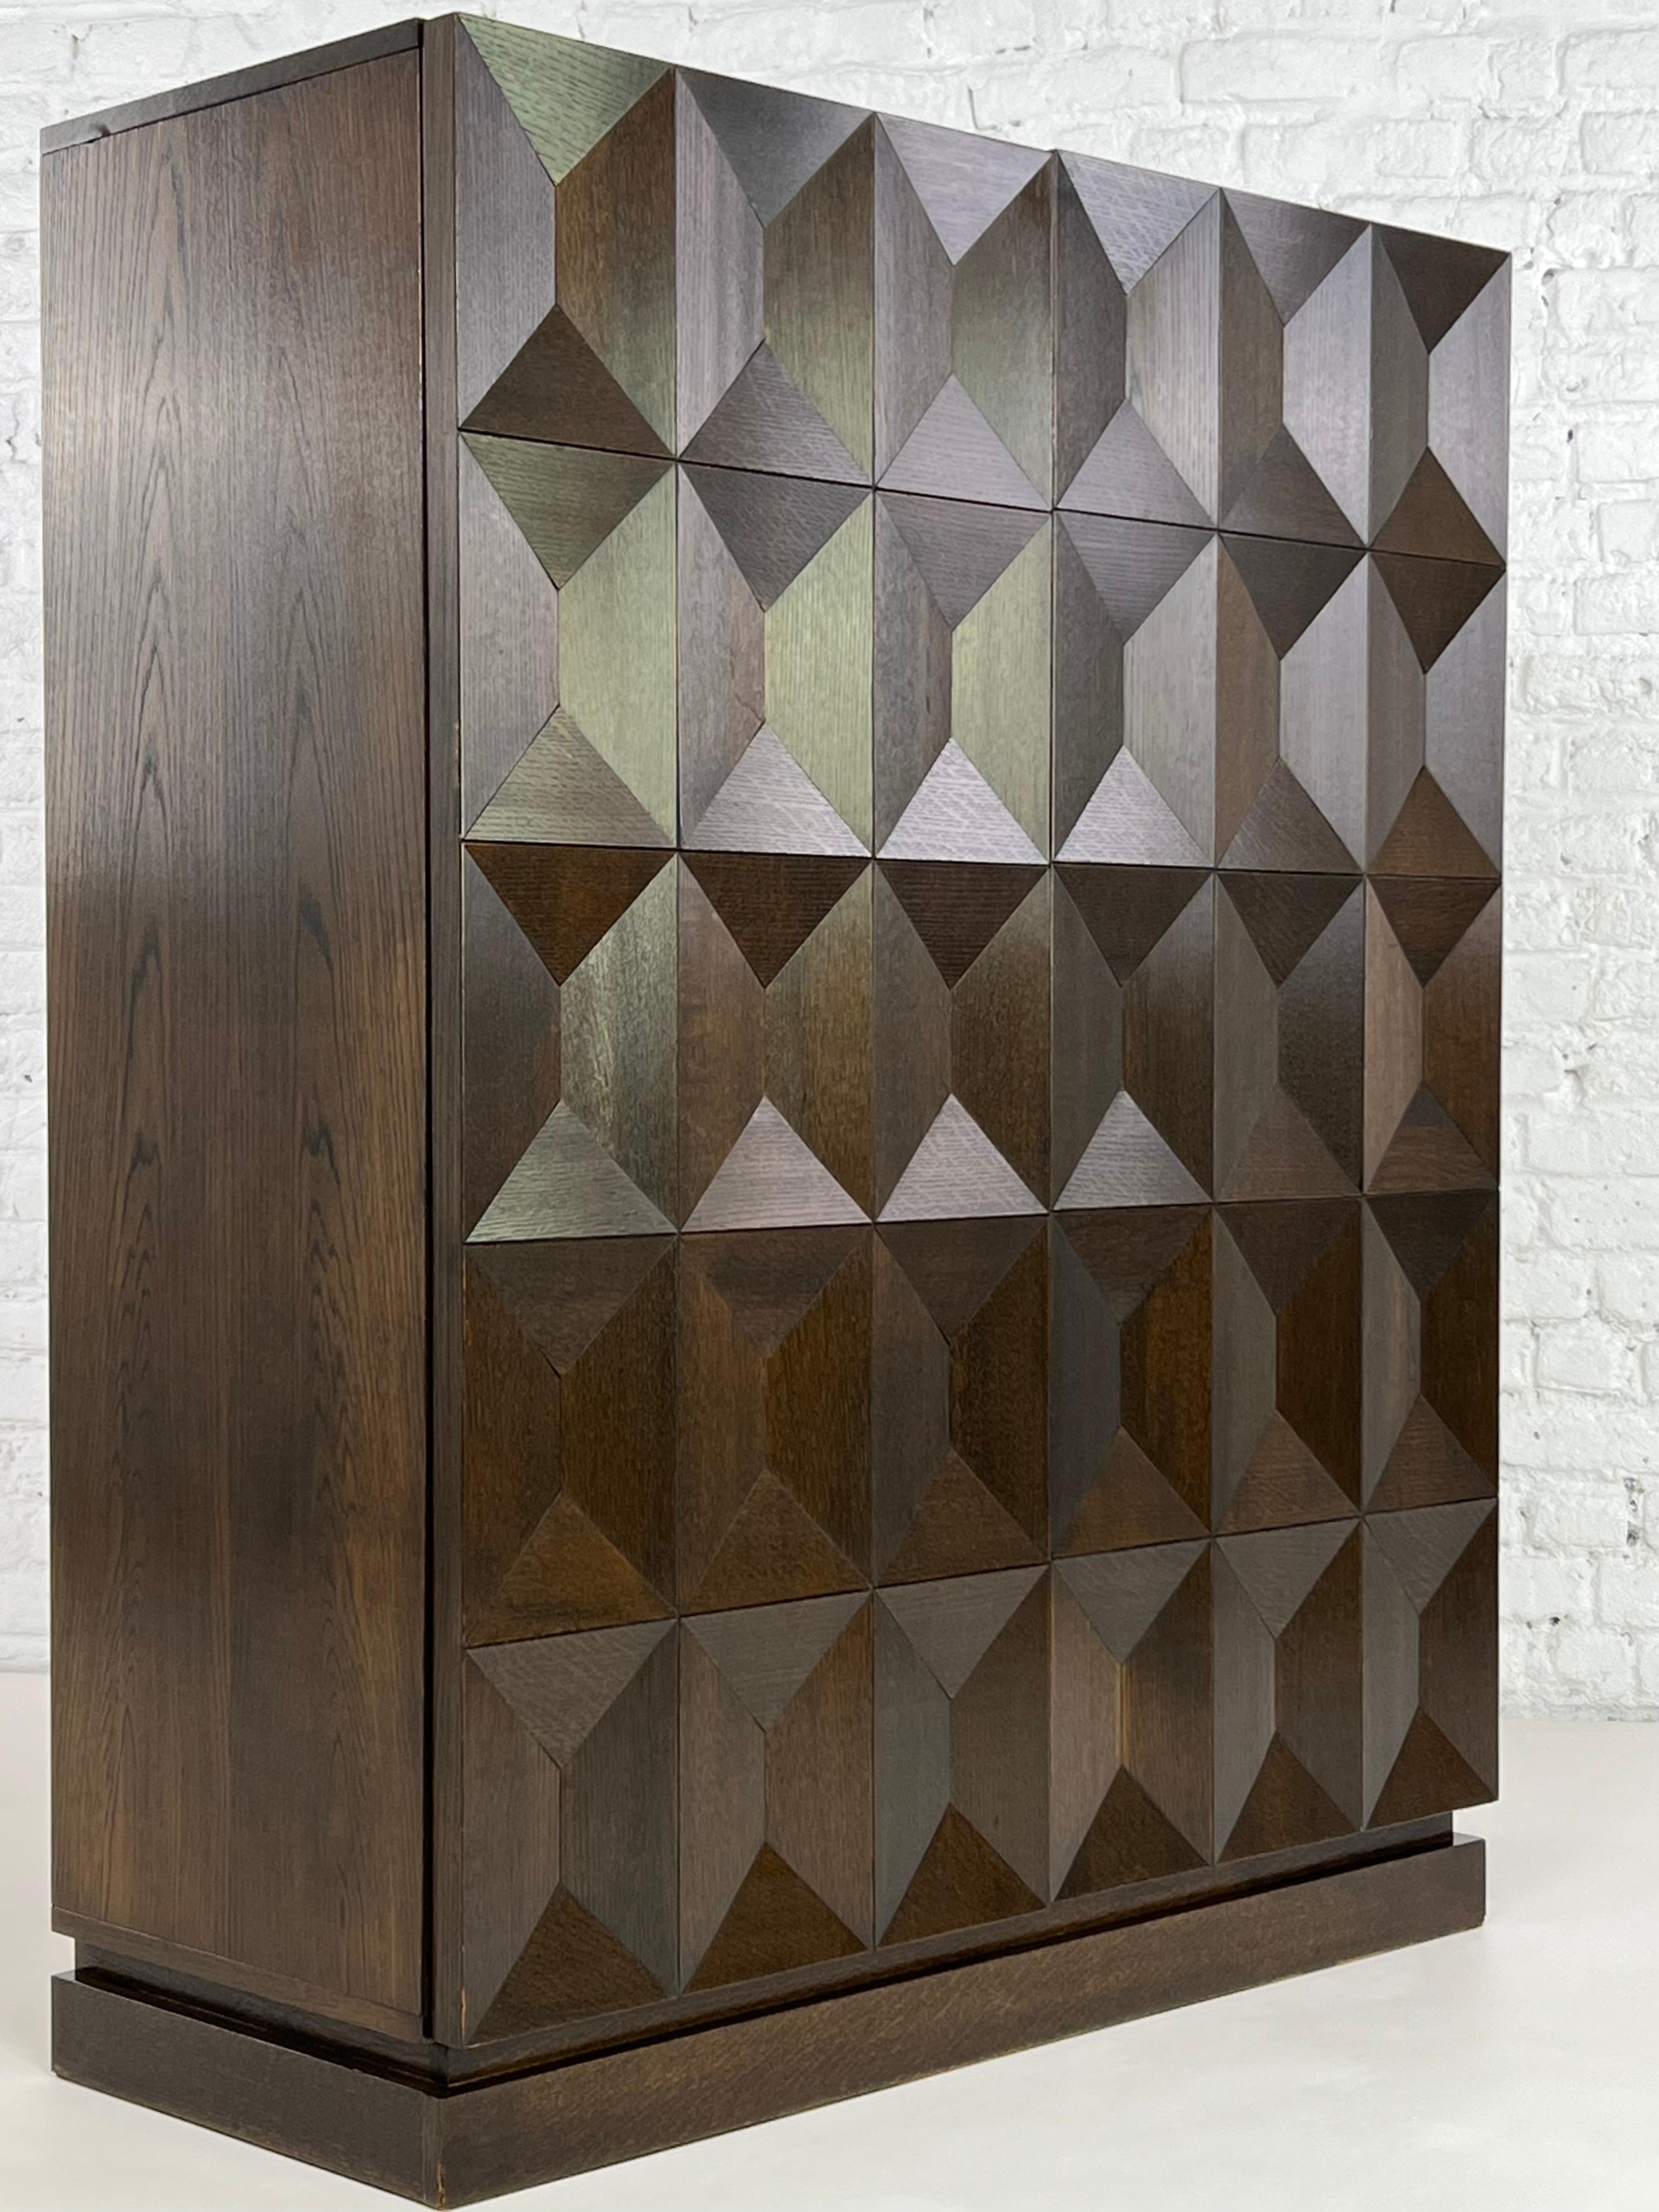 Minimalist And Brutalist Dutch Design buffet with graphic diamond shaped panels doors, geometric and timeless lines, robustness and high quality crafmanship by the De Coene Brothers : can be used as a dry bar or storage cabinet.
 